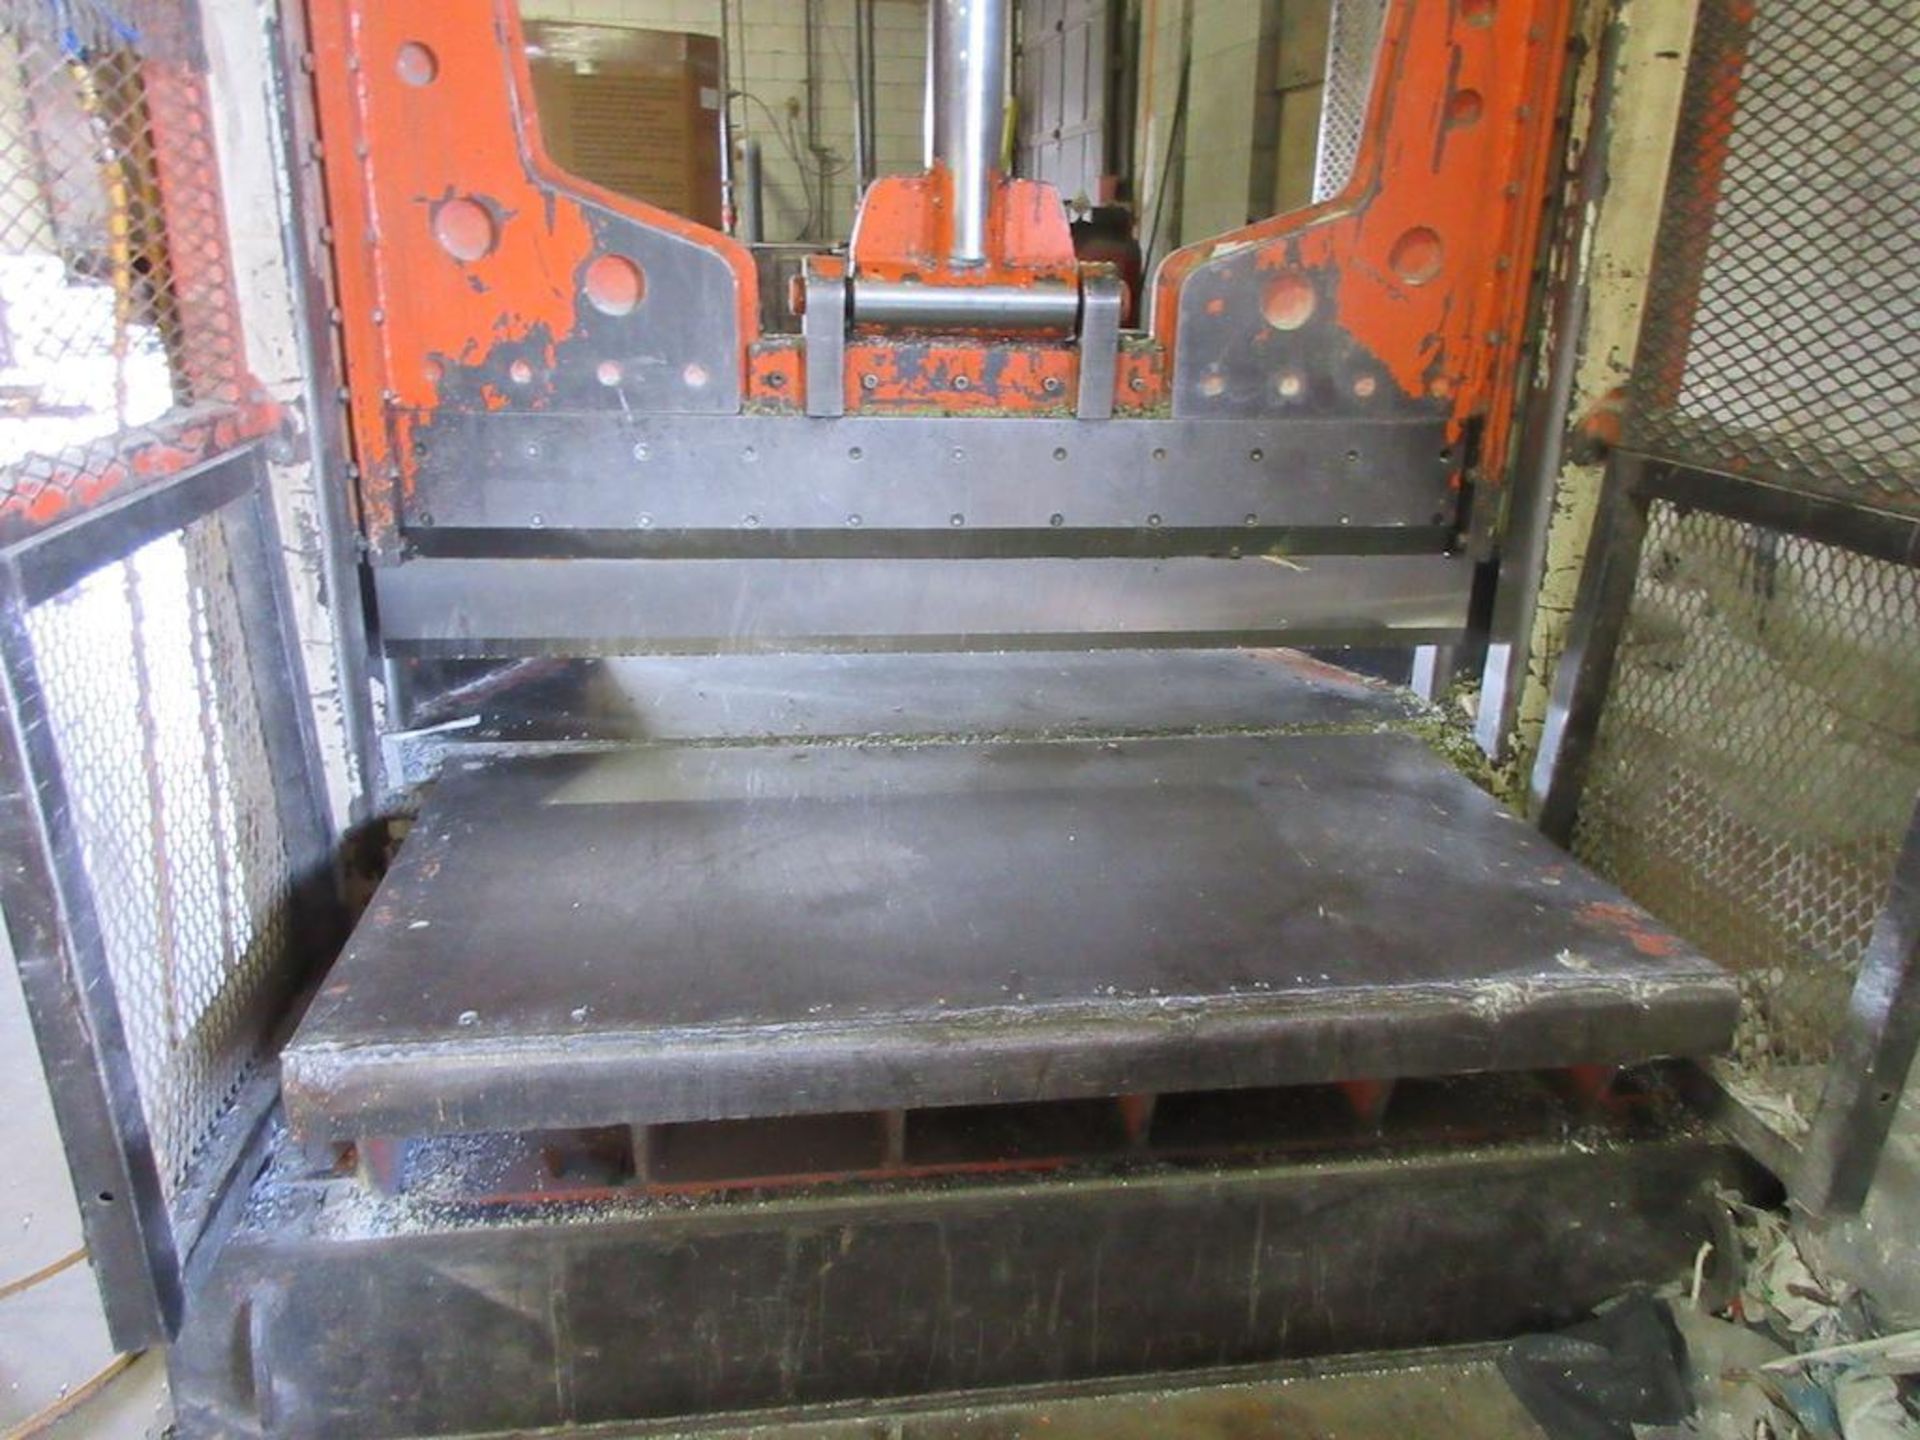 2001 ROEQCO (Rolling Equipment Company Inc) Guillotine, 5' blade, Model HS 115-66-218, sn 115-01-01- - Image 2 of 8